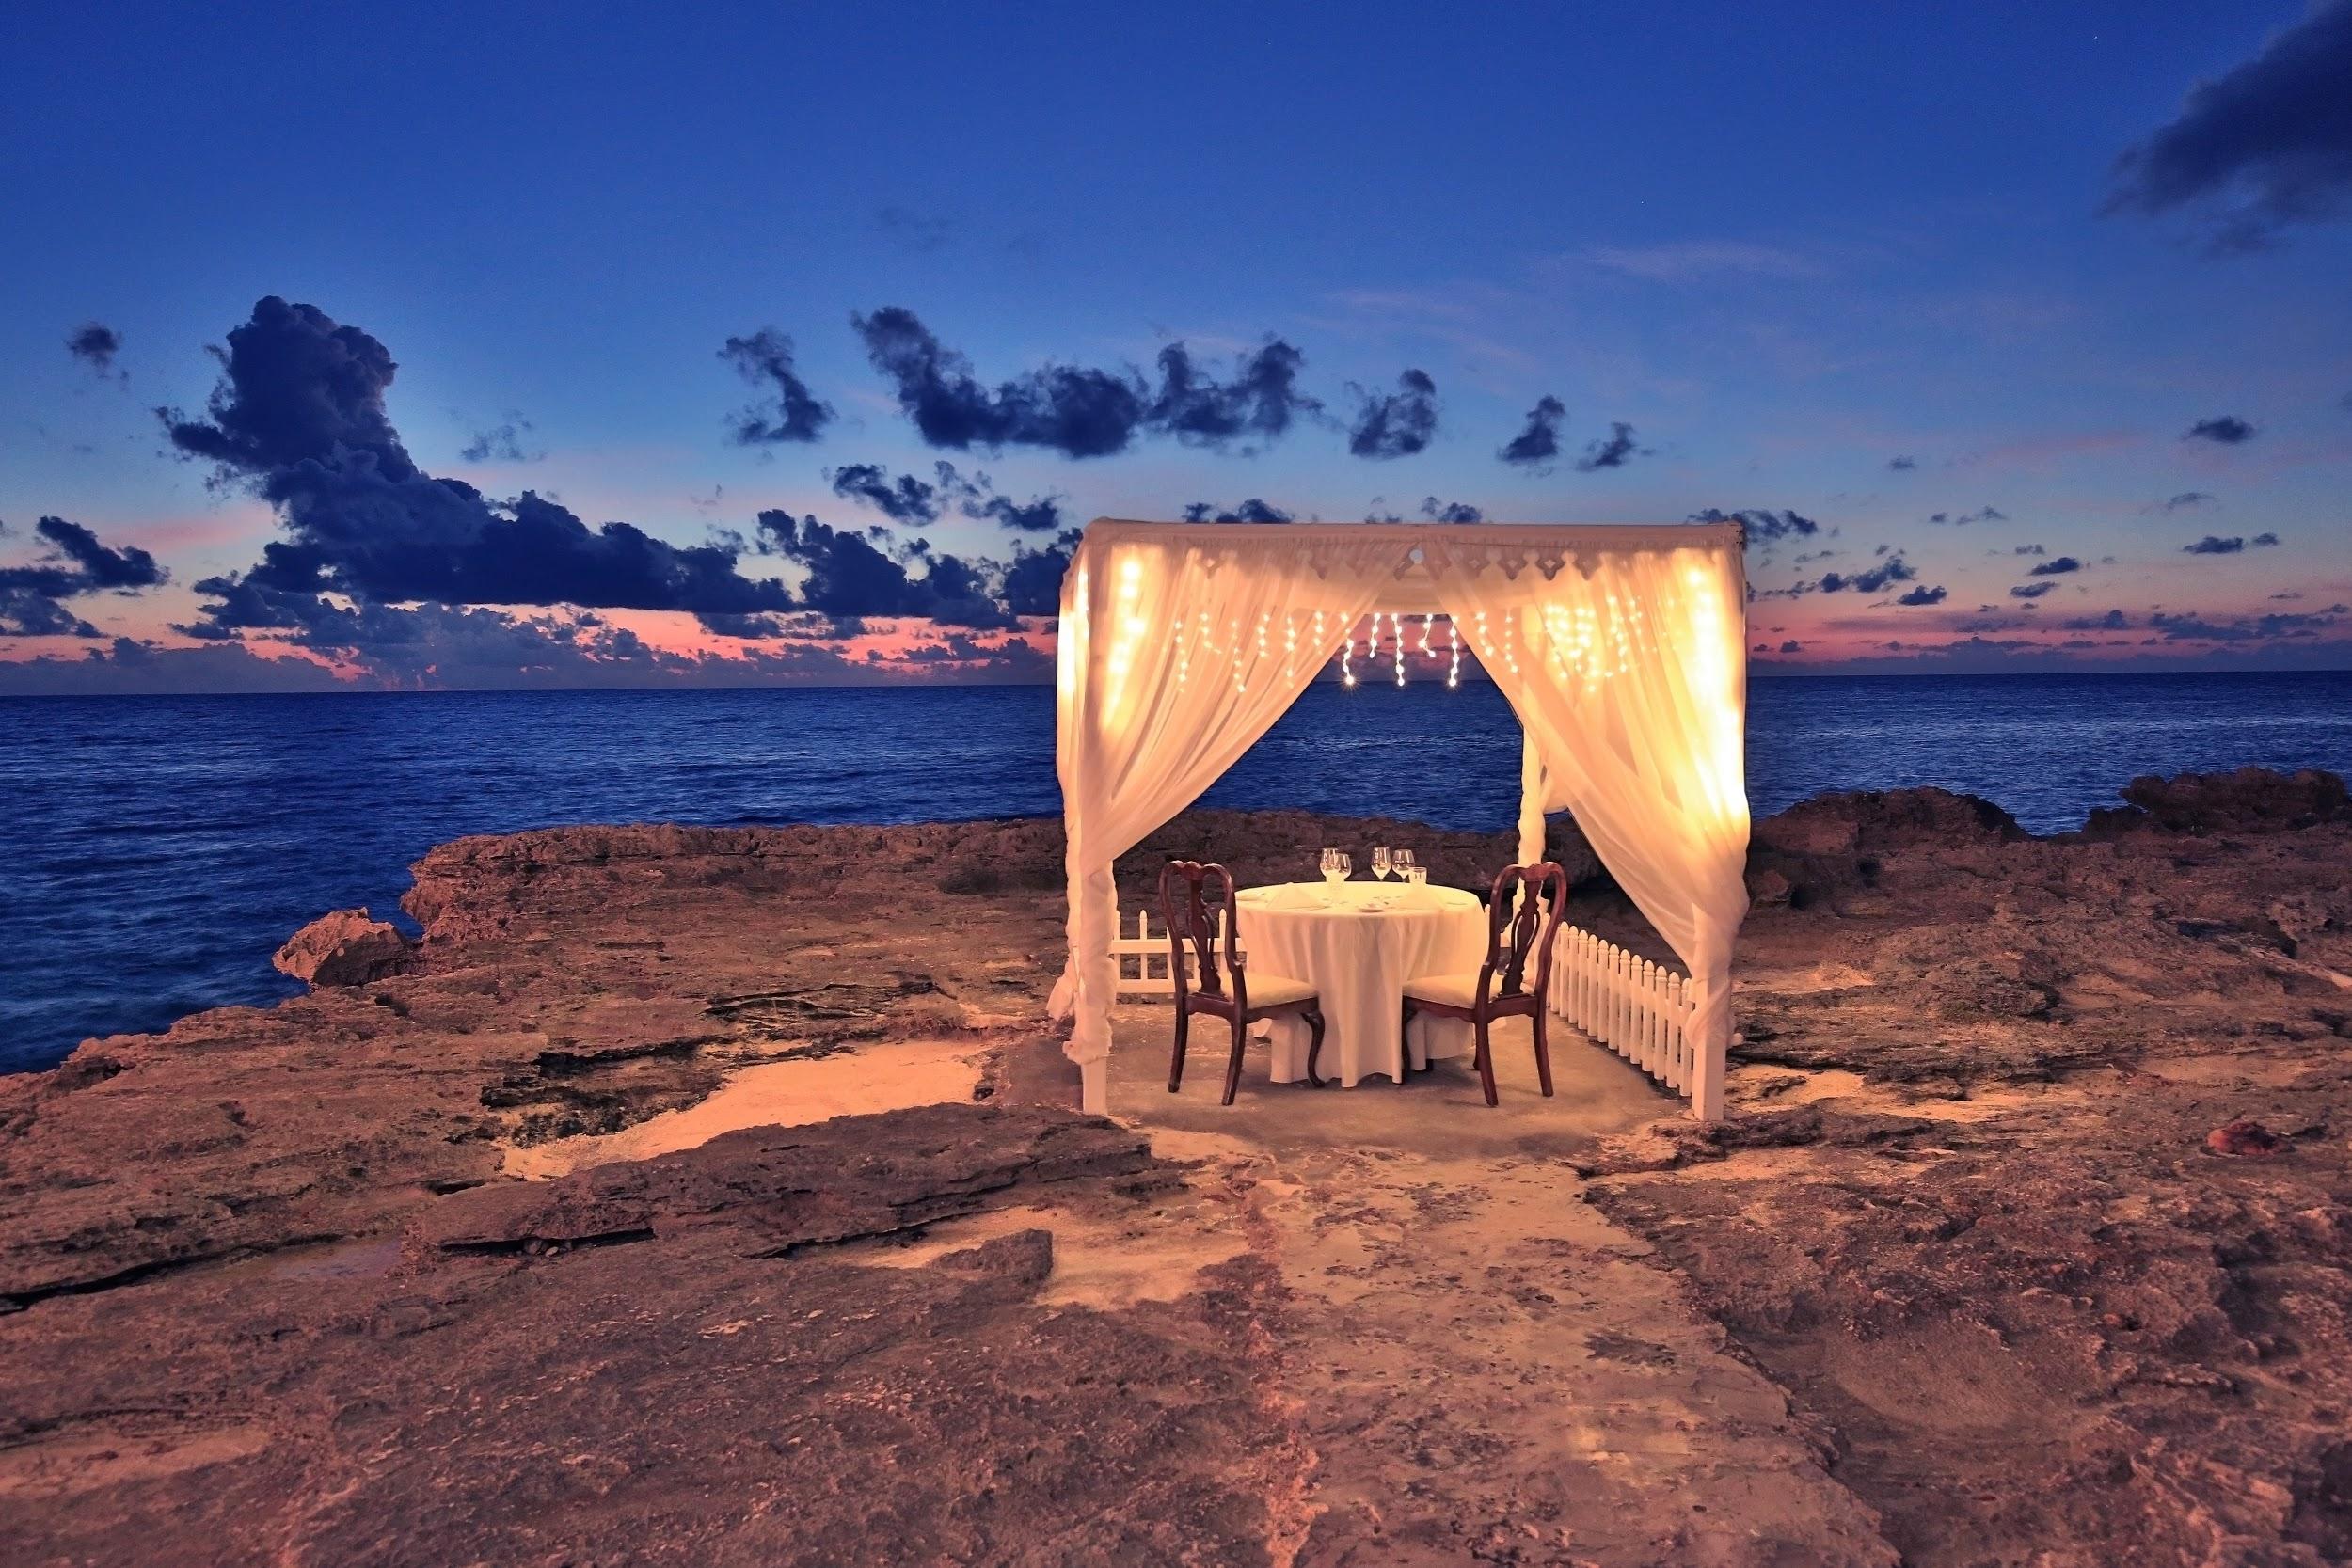 Try the Sea Side Gazebos for your next Romantic Dinner Date in the Cayman Islands!